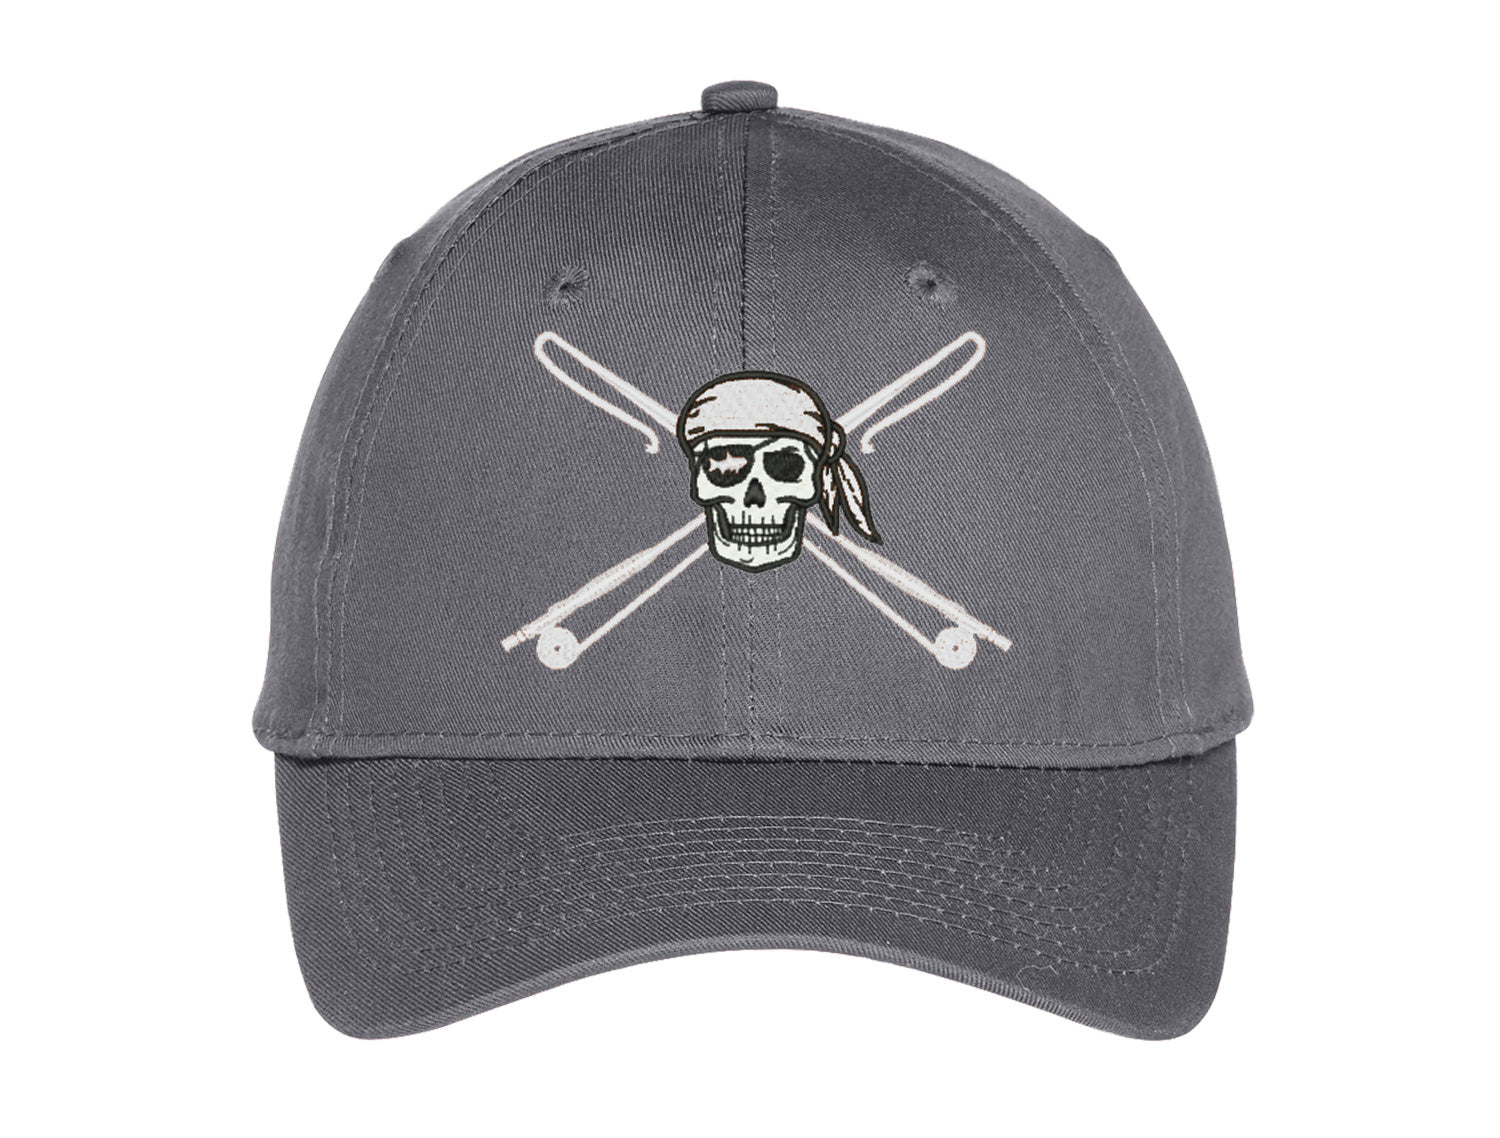 Youth Fishing Hats with Reel Fishy Pirate Skull & Rods Logo - Charcoal